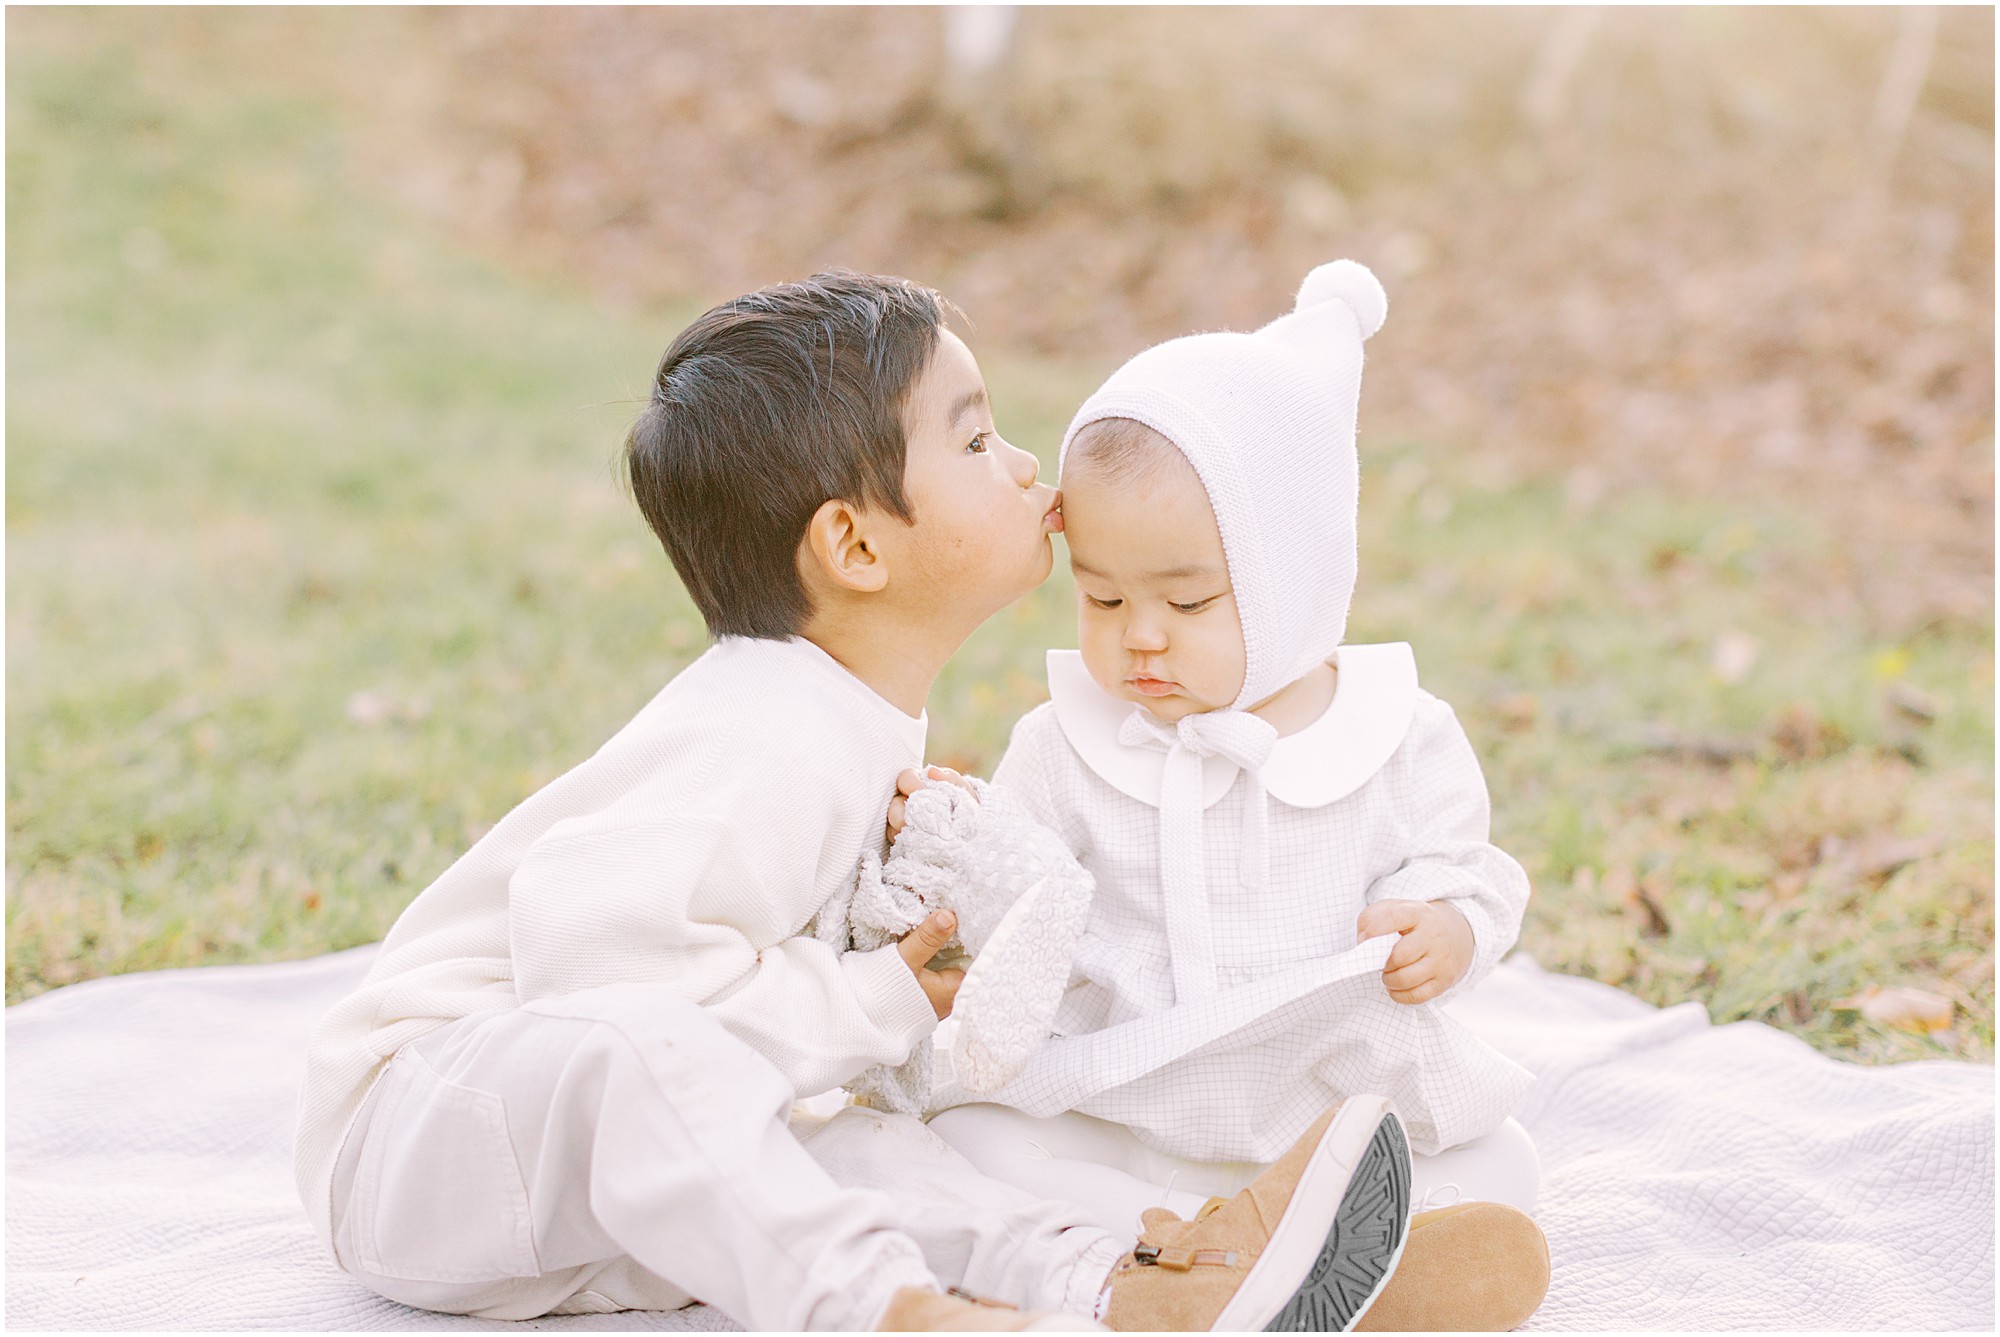 Young toddler boy kissing baby sister while sitting on a blanket